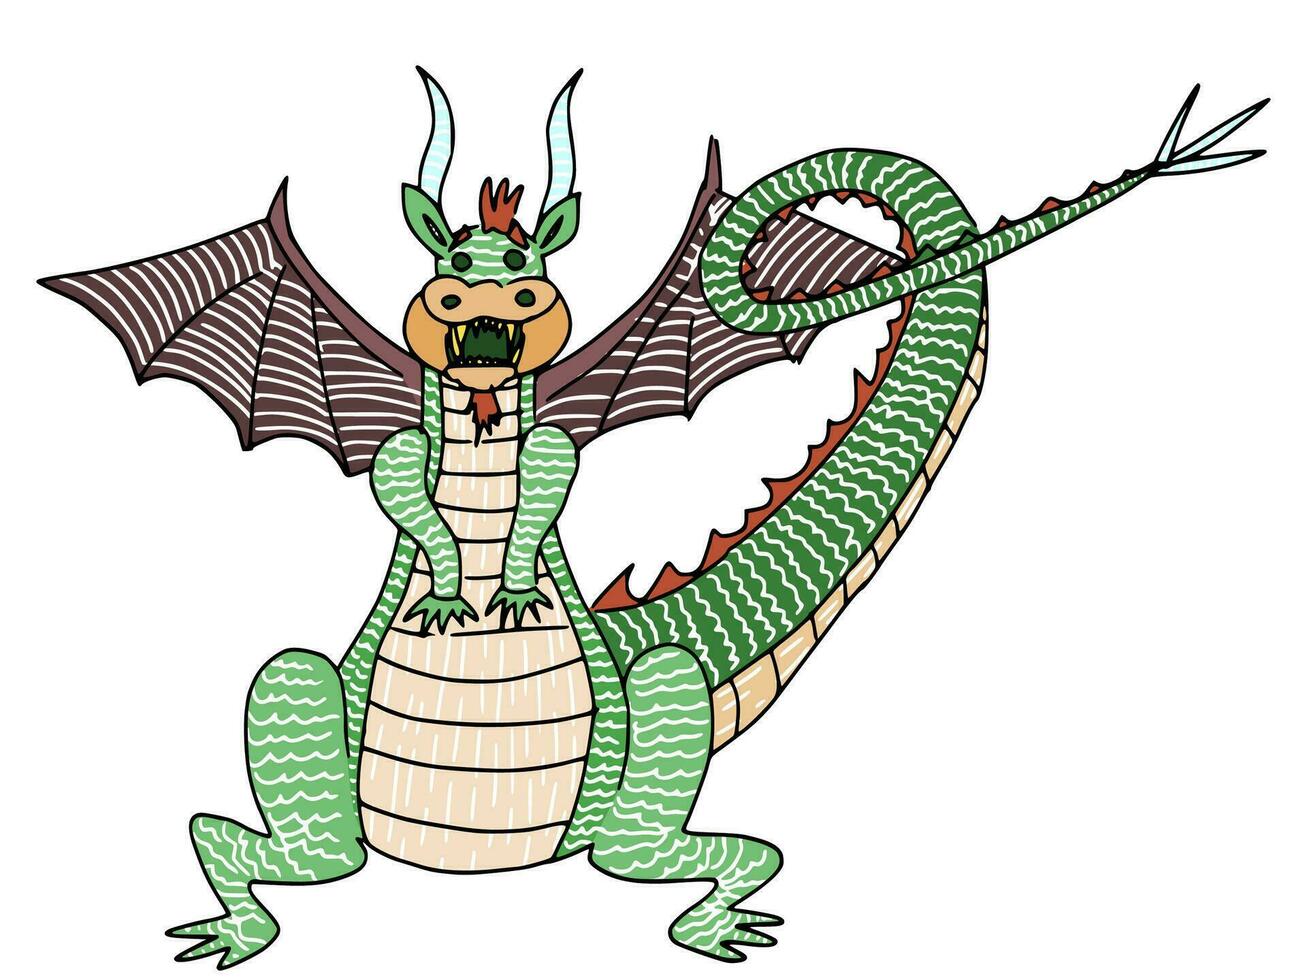 doodle style dragon with wings simple and funny vector